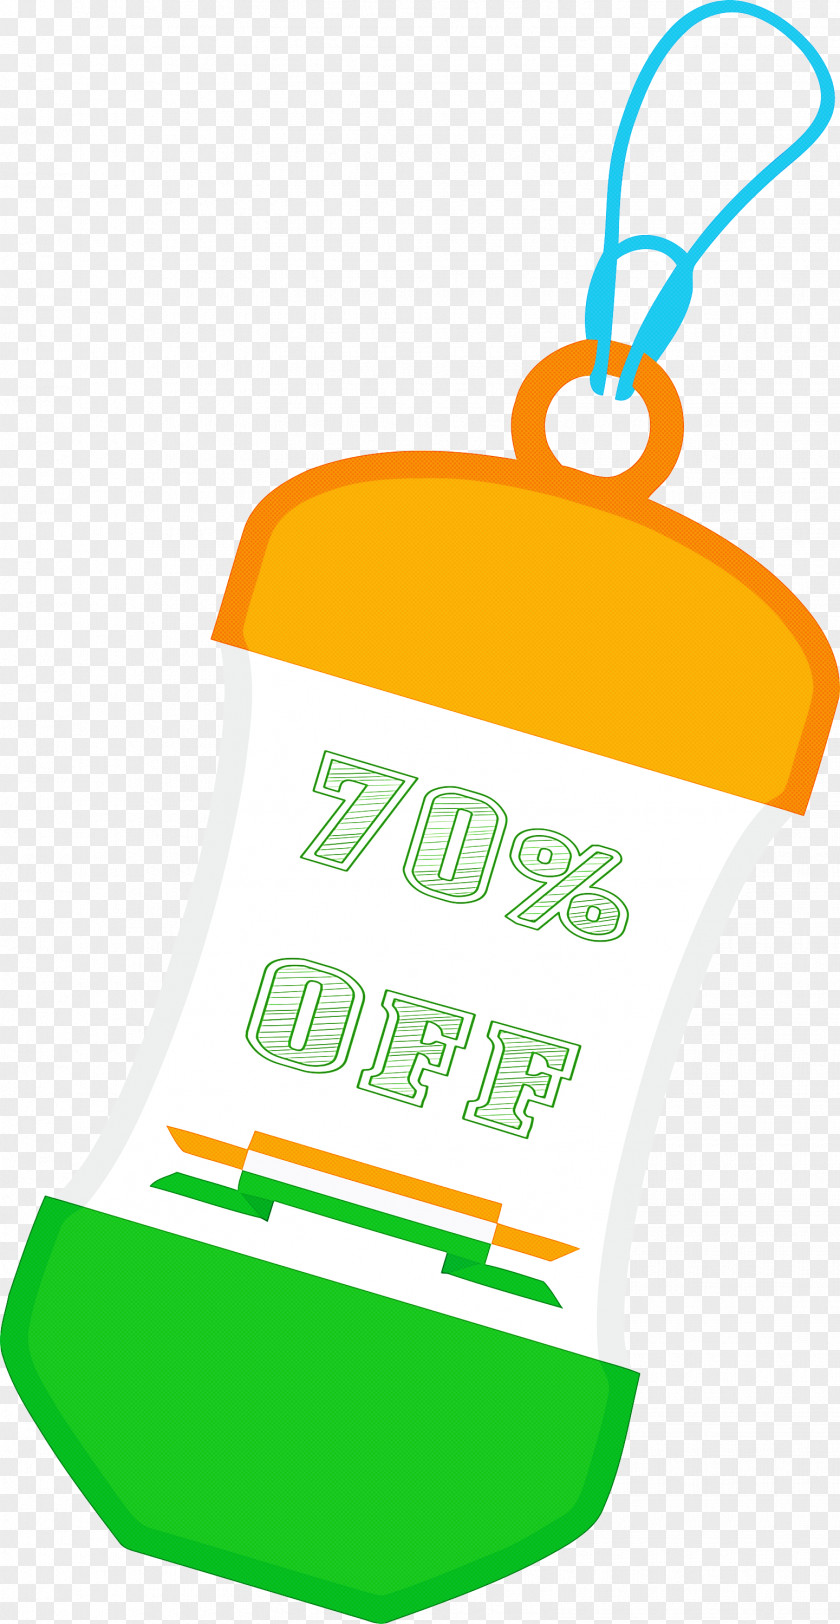 India Republic Day Discount Tag Sale PNG